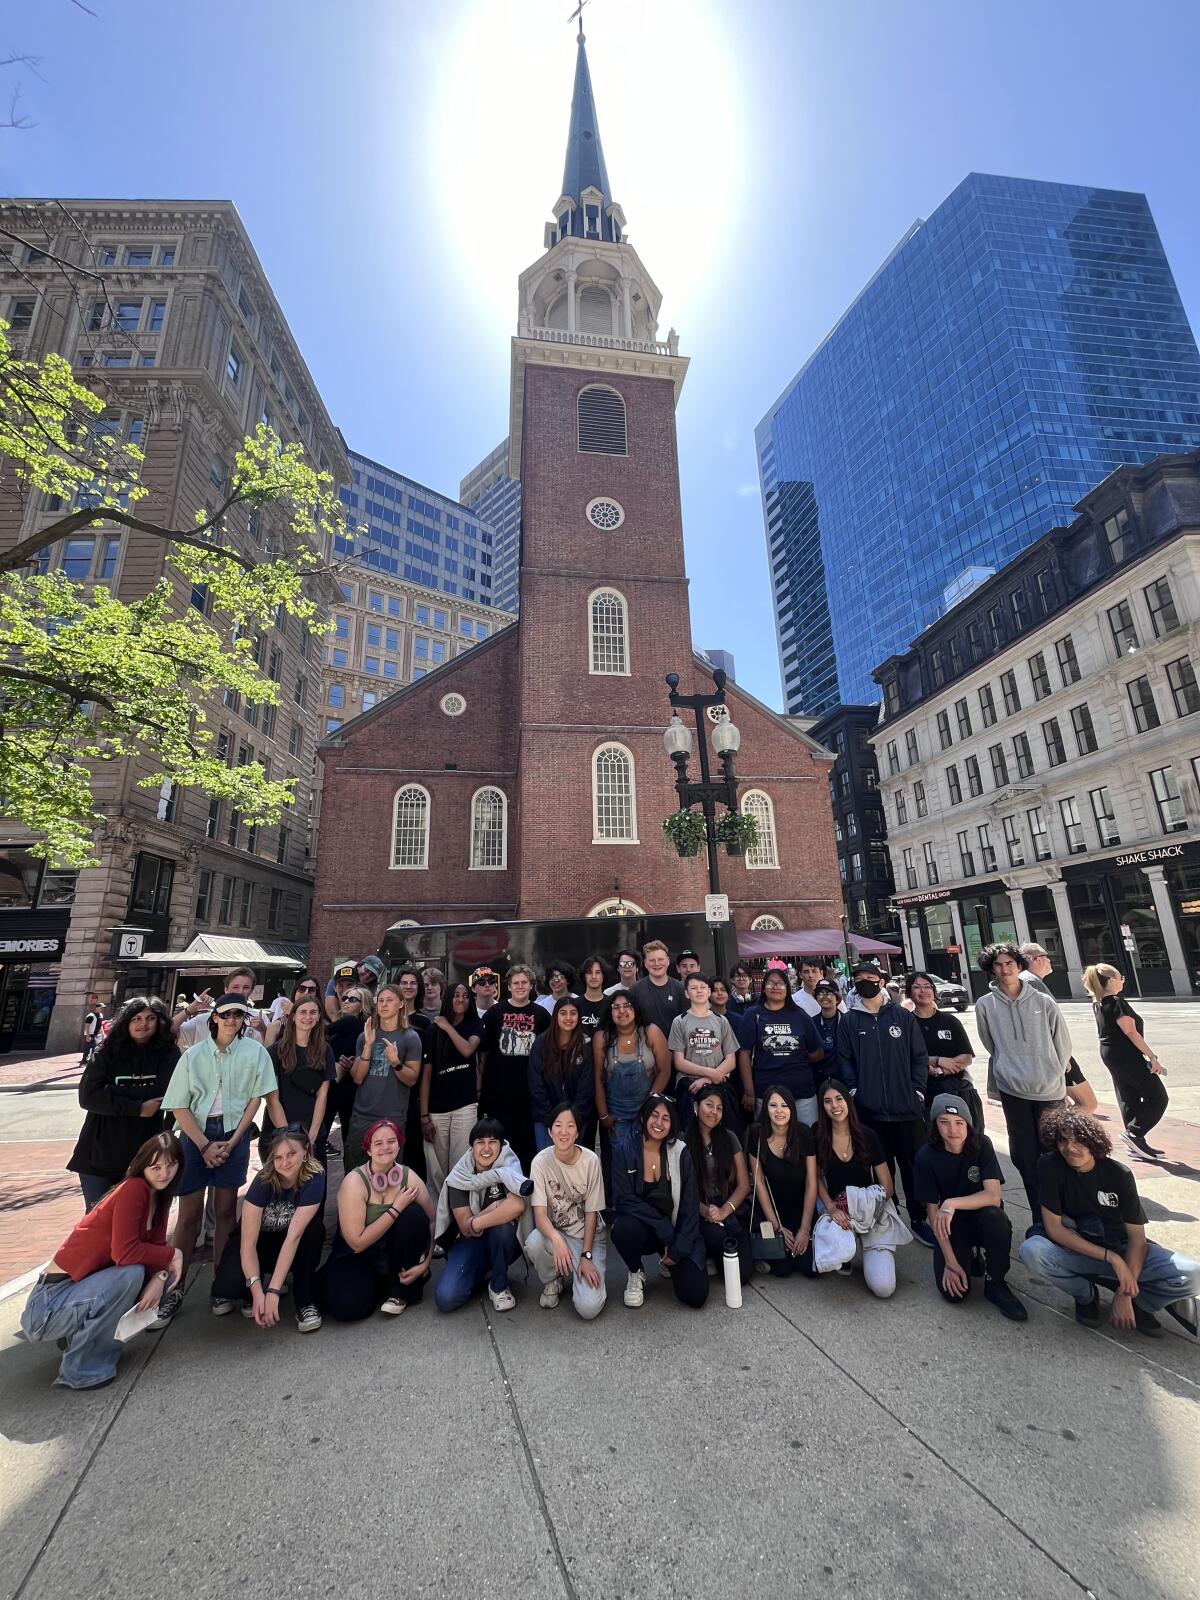 The Newport Harbor wind ensemble and orchestra pose in front of the Old South Meeting House.